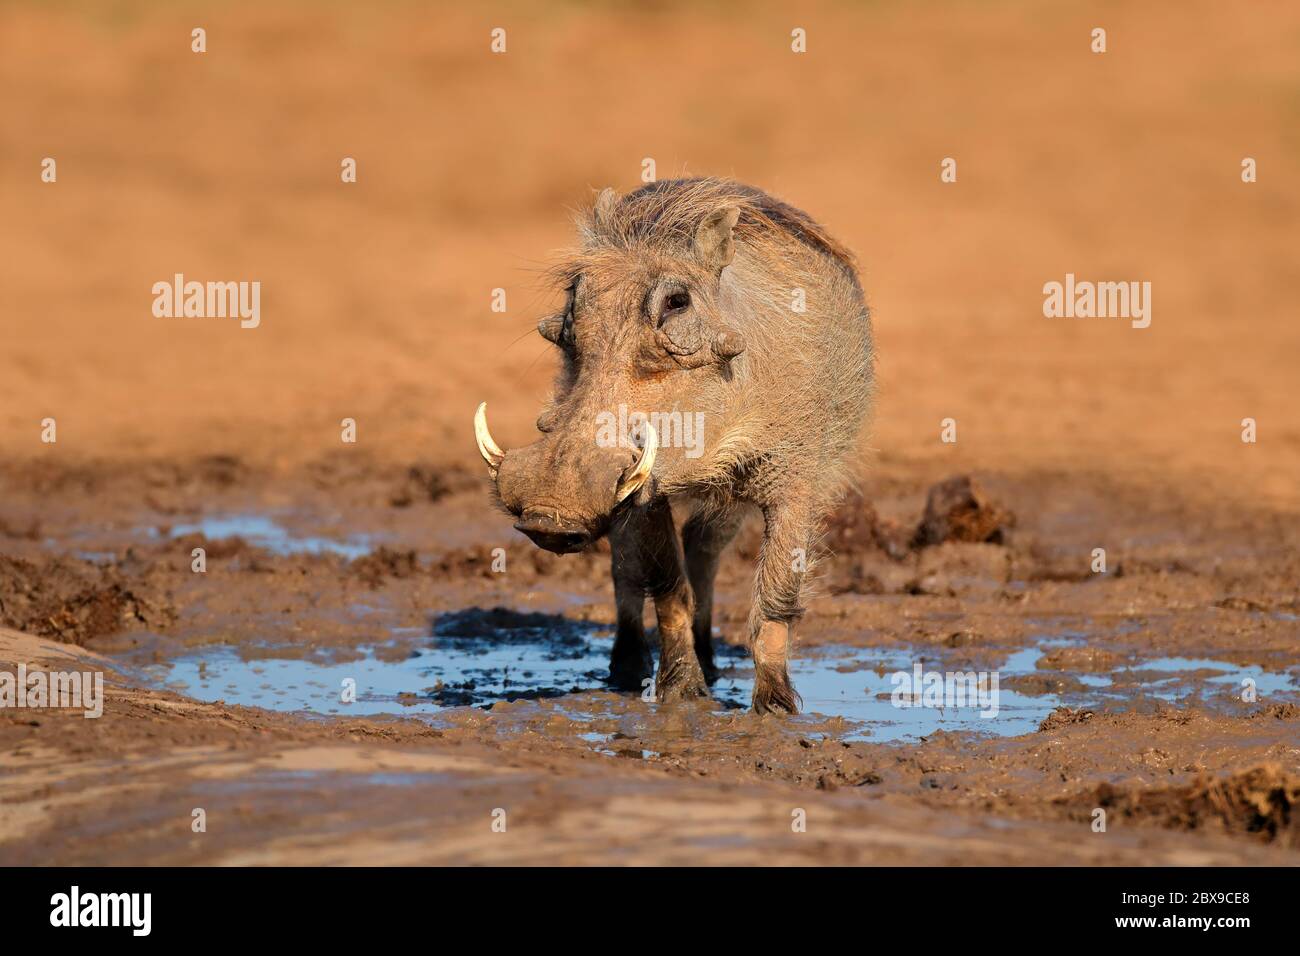 https://c8.alamy.com/comp/2BX9CE8/a-warthog-phacochoerus-africanus-at-a-natural-waterhole-south-africa-2BX9CE8.jpg